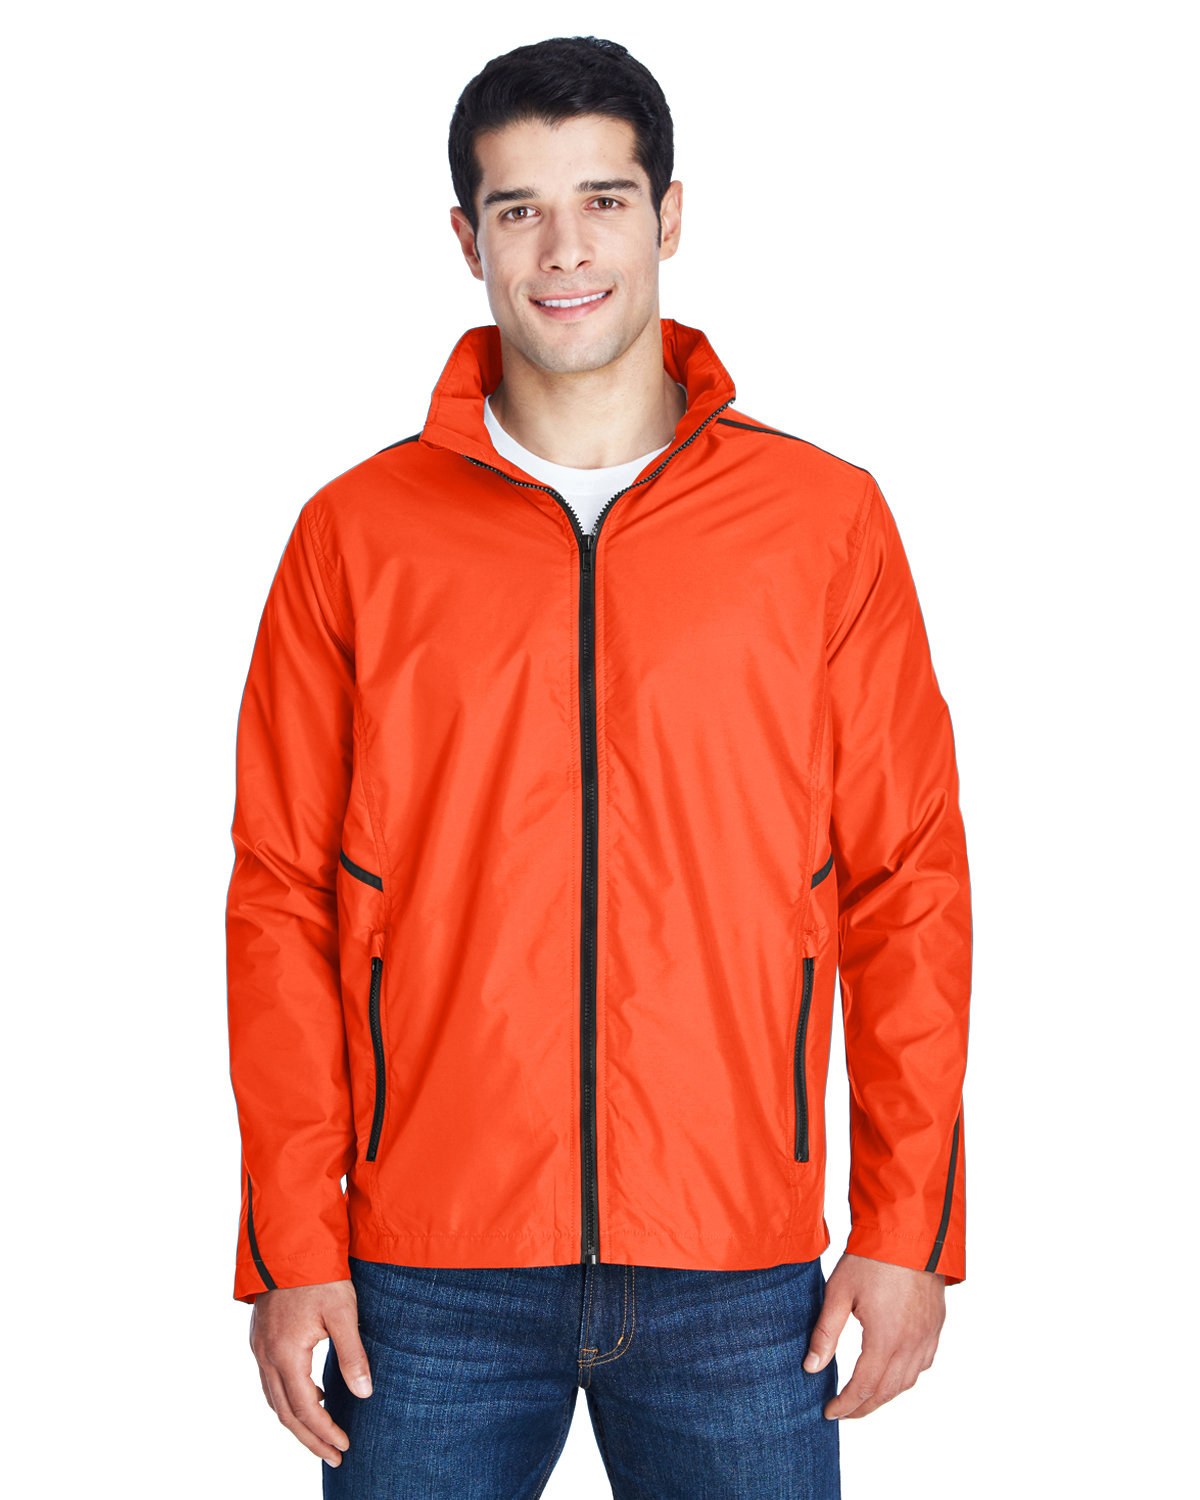 Team 365 Adult Conquest Jacket with Mesh Lining SPORT ORANGE 